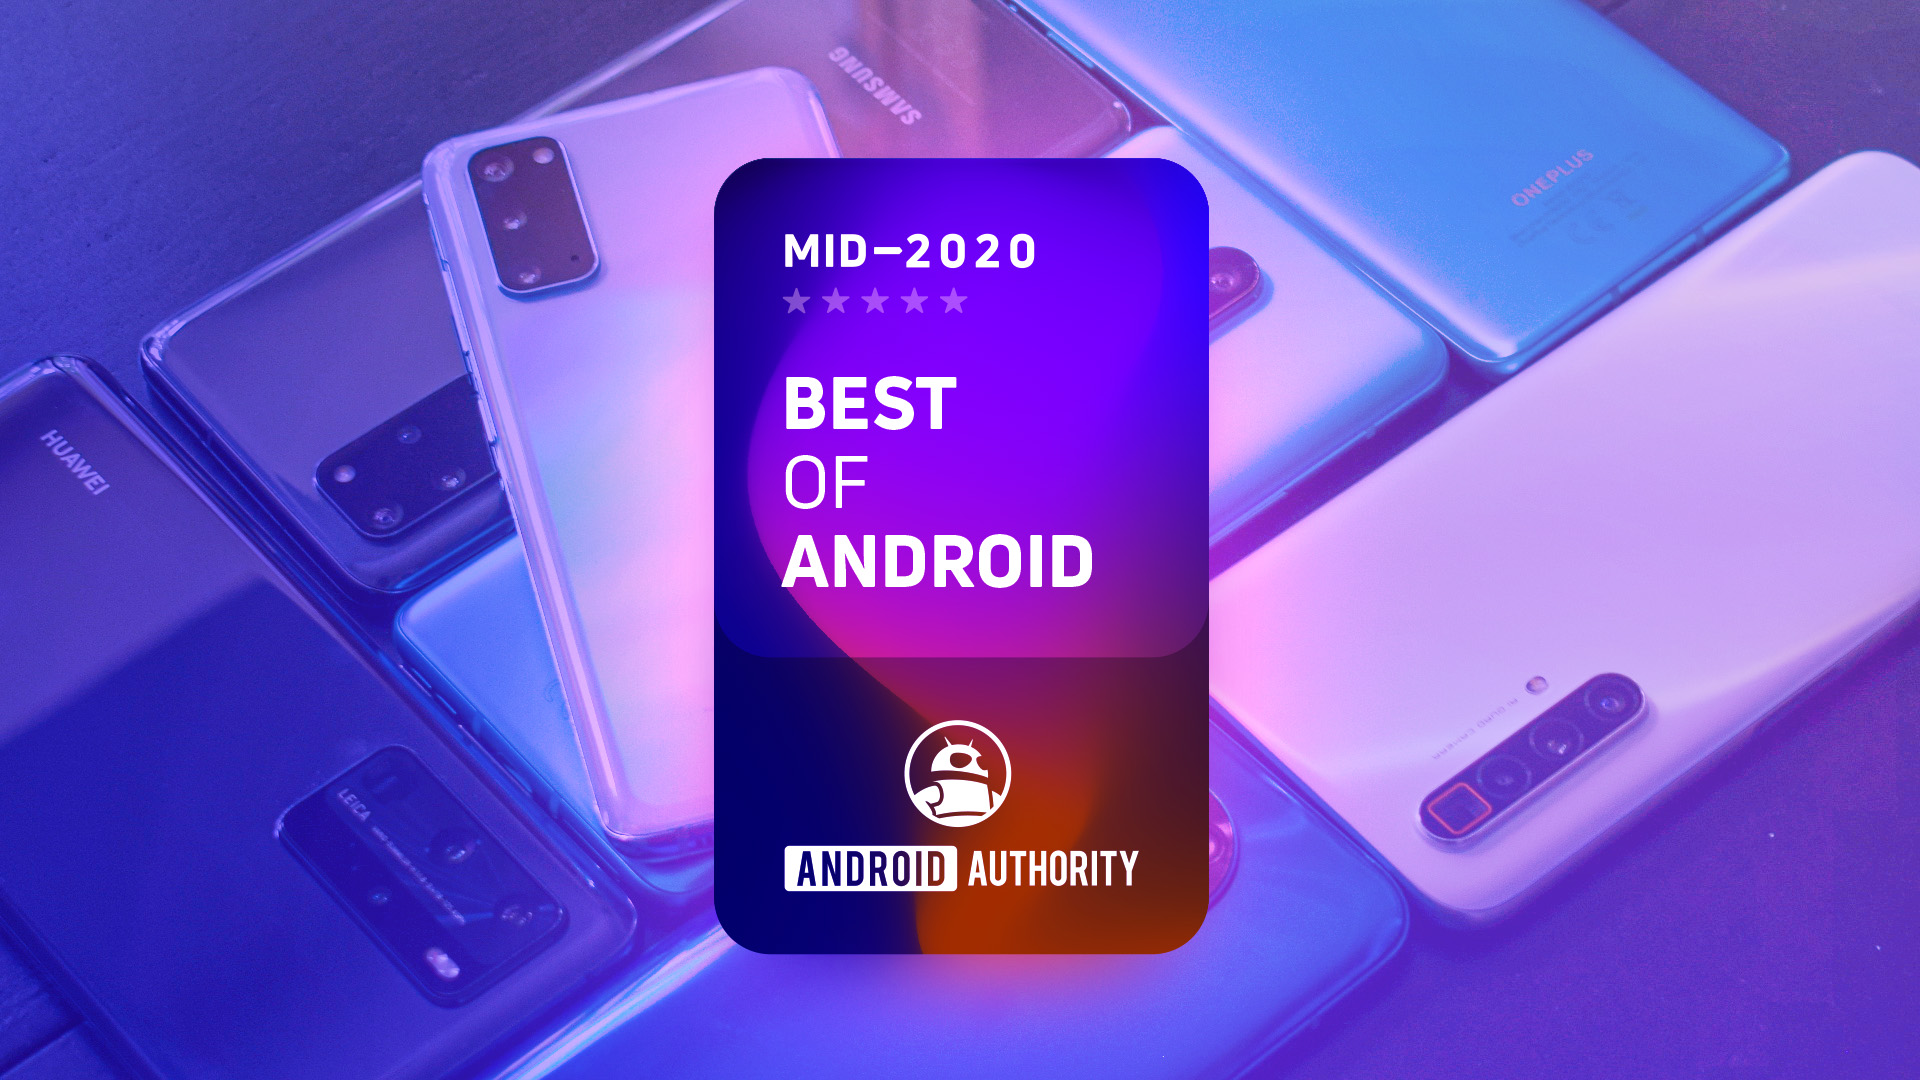 Best of Android Mid 2020